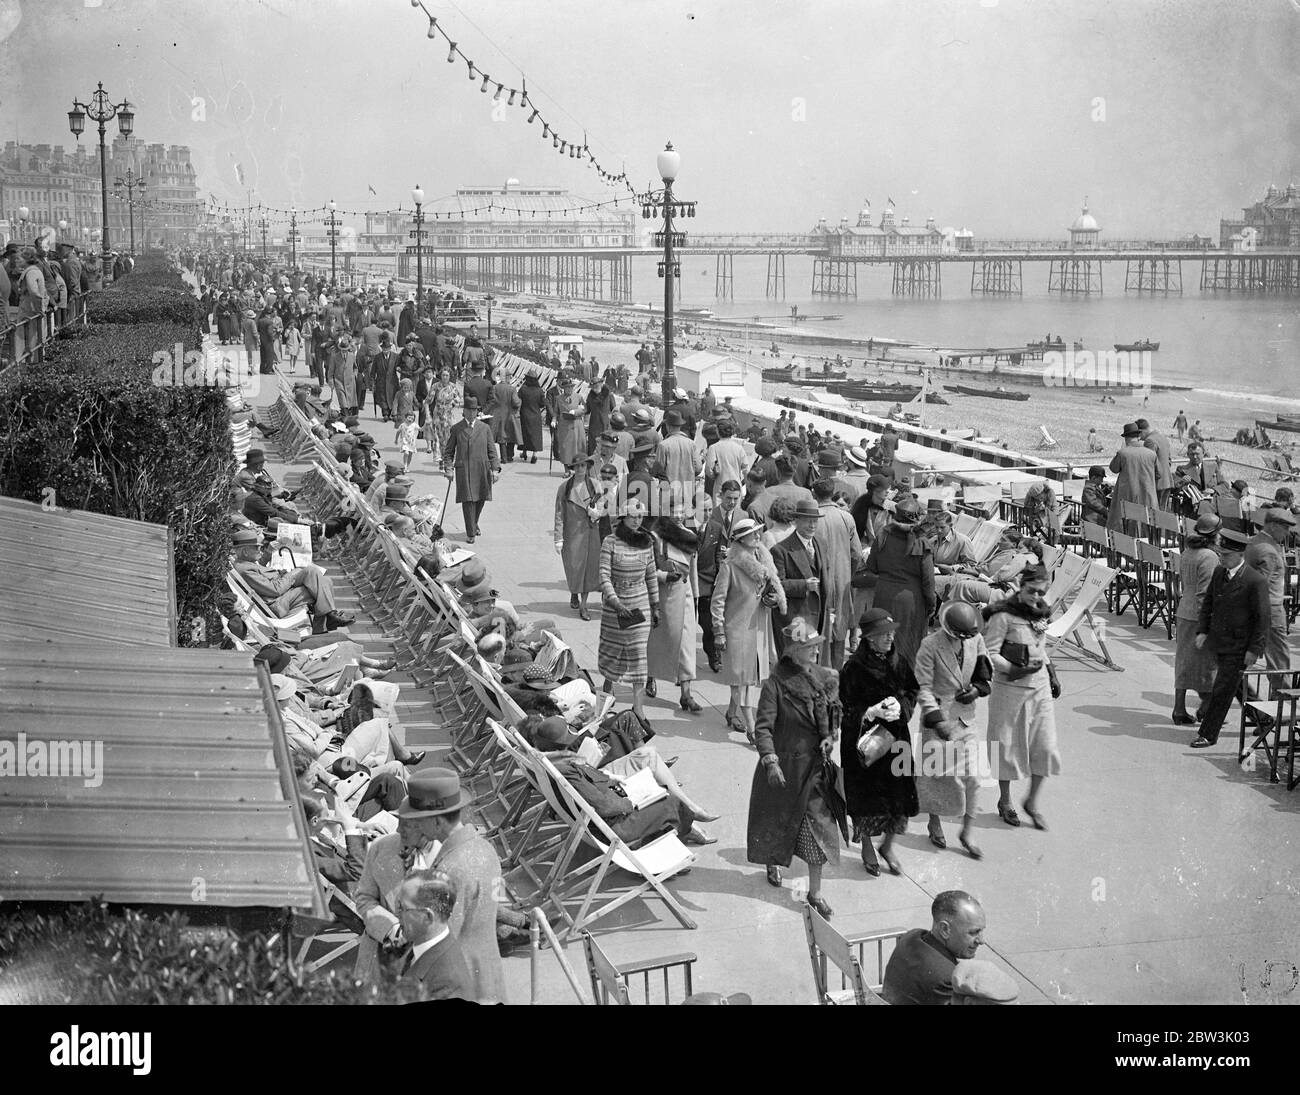 Holiday Crowds Find the Sun at Eastbourne Although London shivered in cold wind thousands of visitors found the sun in holiday mood at Eastbourne. Large crowds thronged the beach . Photo Shows : Large crowds walking in the sun on the promenade at Eastbourne today ( Whit - Sunday ) 31 May 1936 Stock Photo